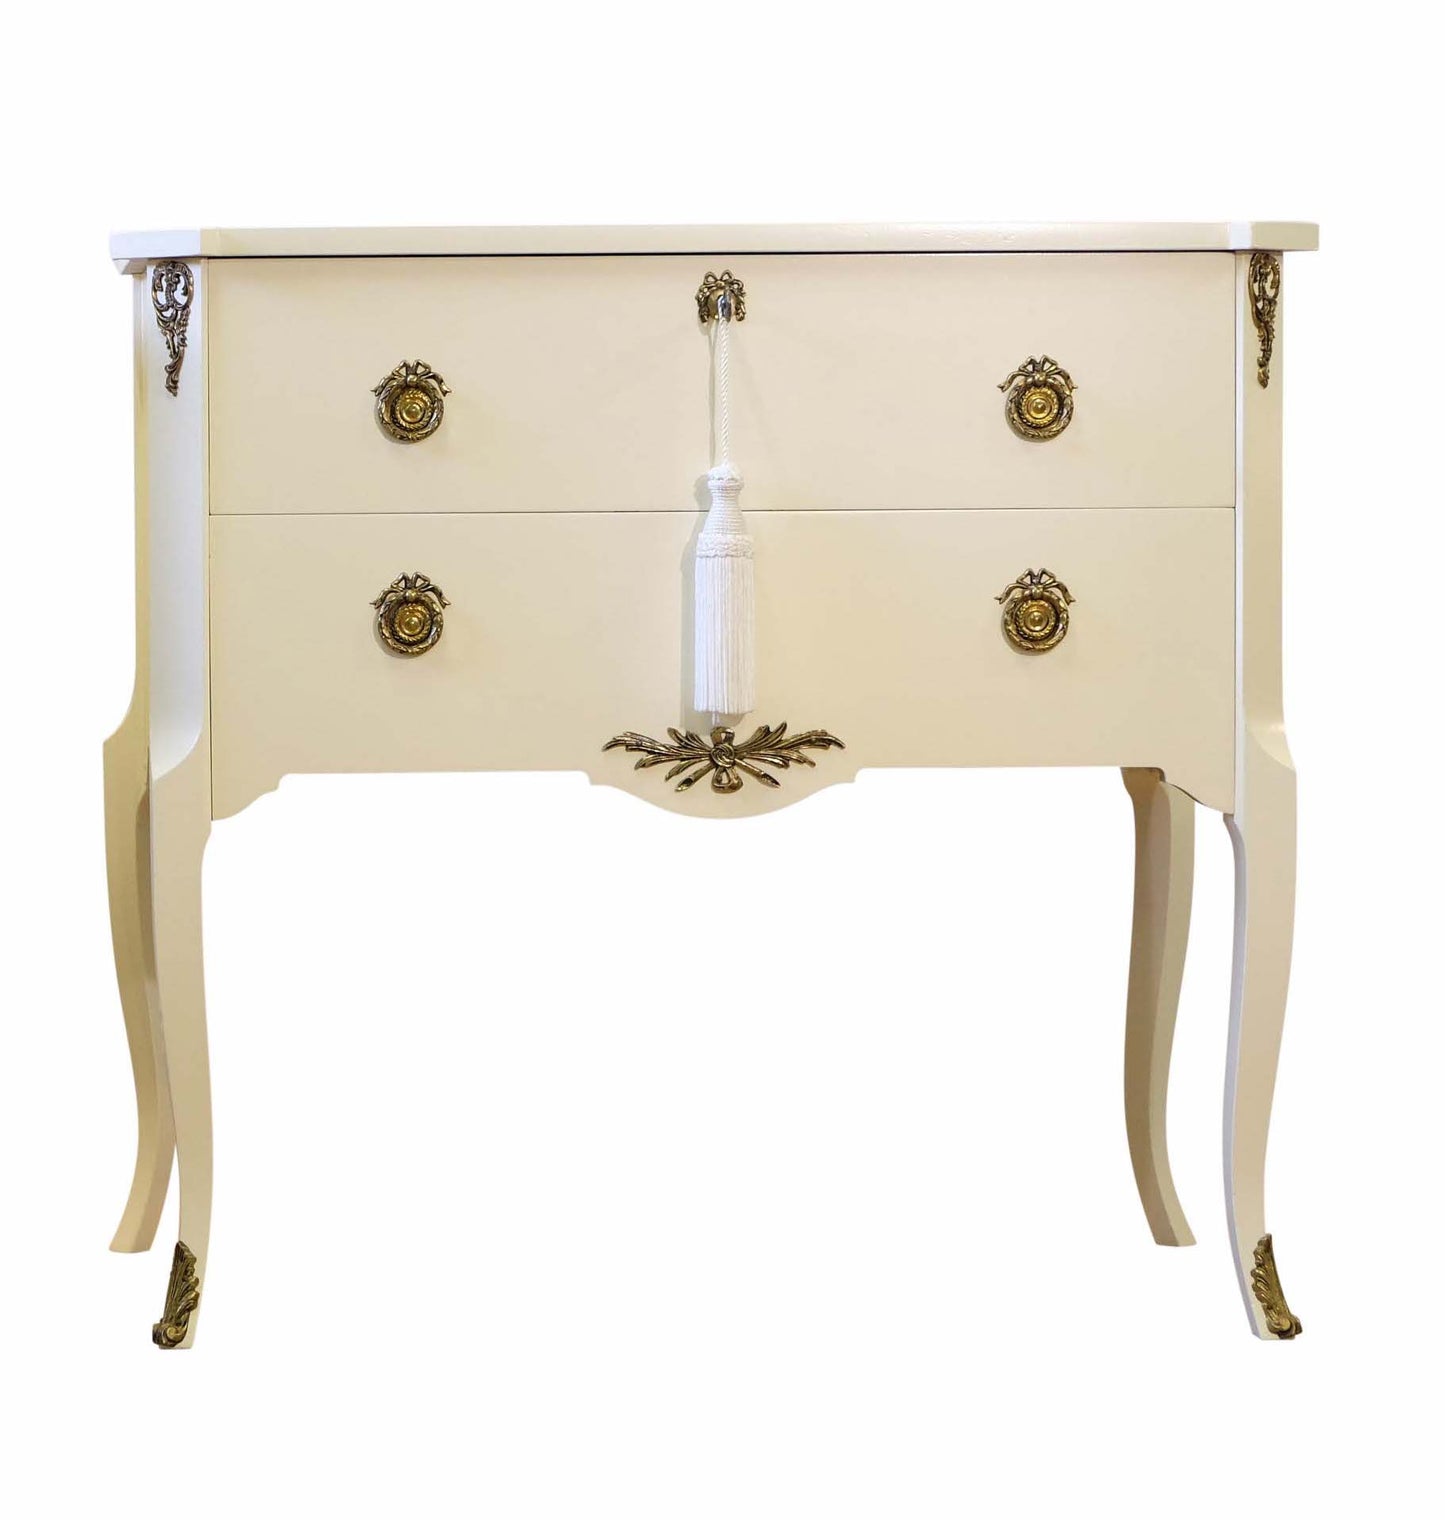 (727-1) Gustavian Style Commode in Calming Cream with Brass Details (Single)